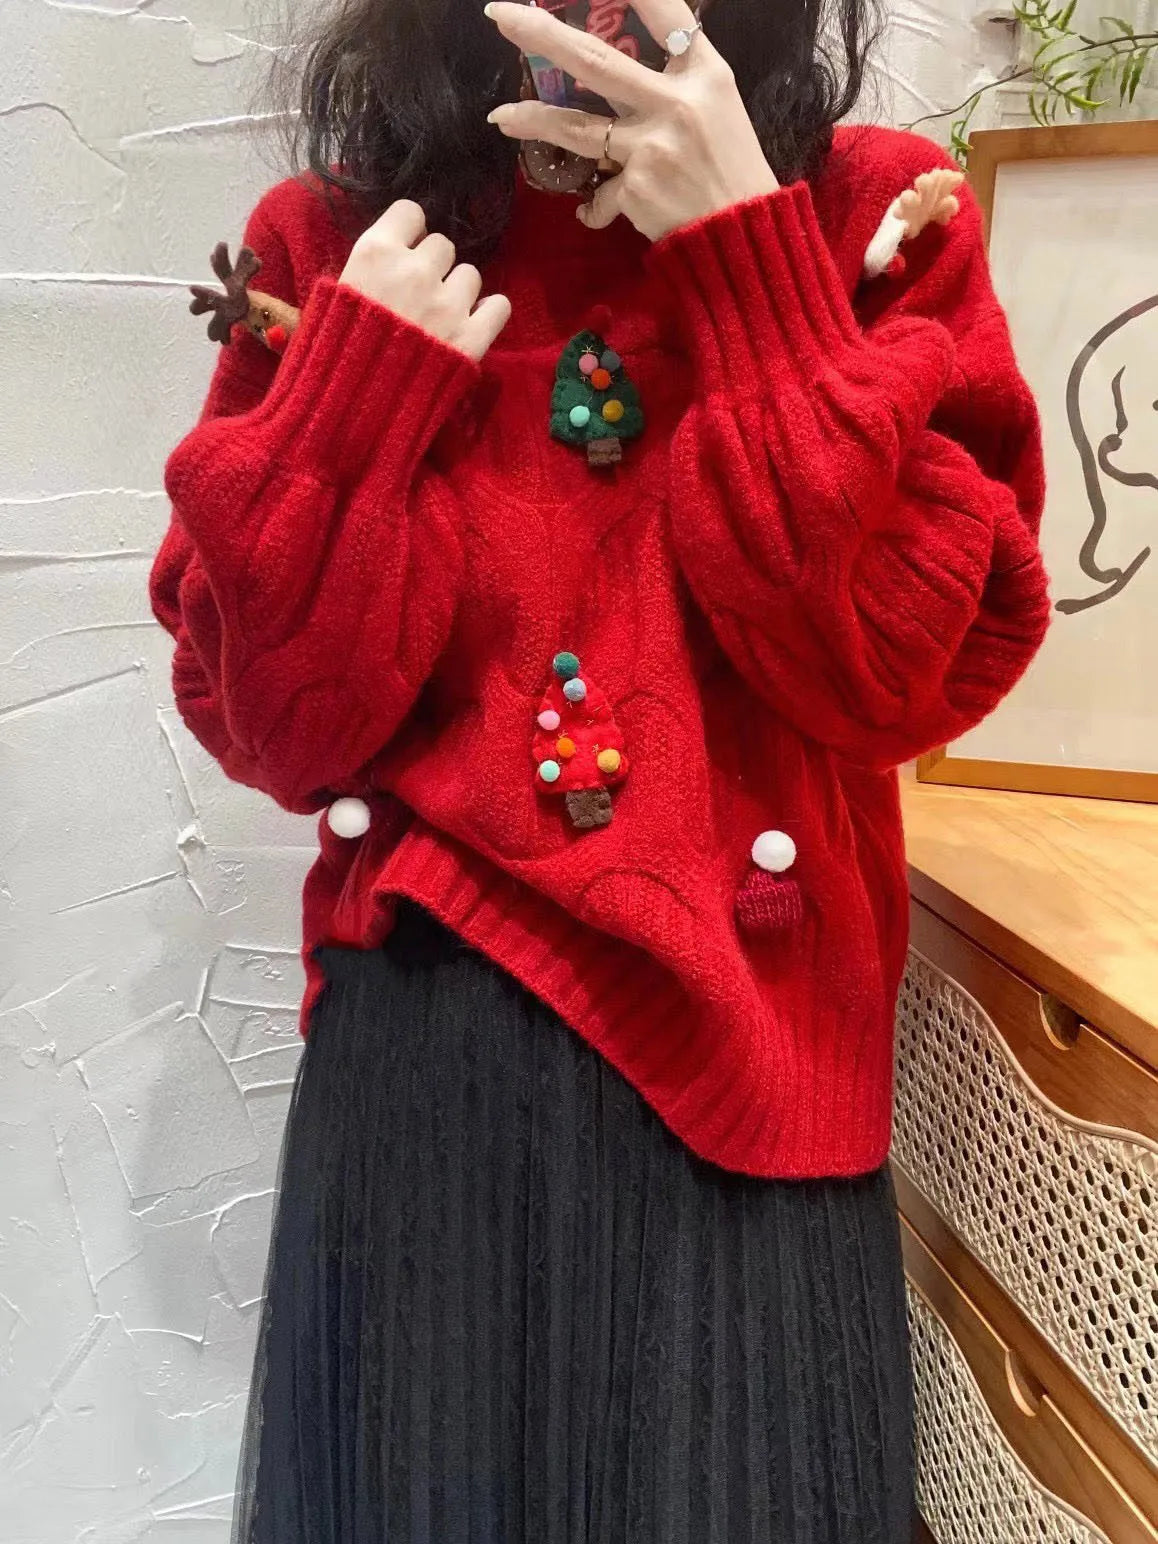 Red Christmas Sweater New Autumn/Winter Women's Unique Colorful Decal Atmosphere Feel Pullover Fashion Versatile Loose Top New Year voguable